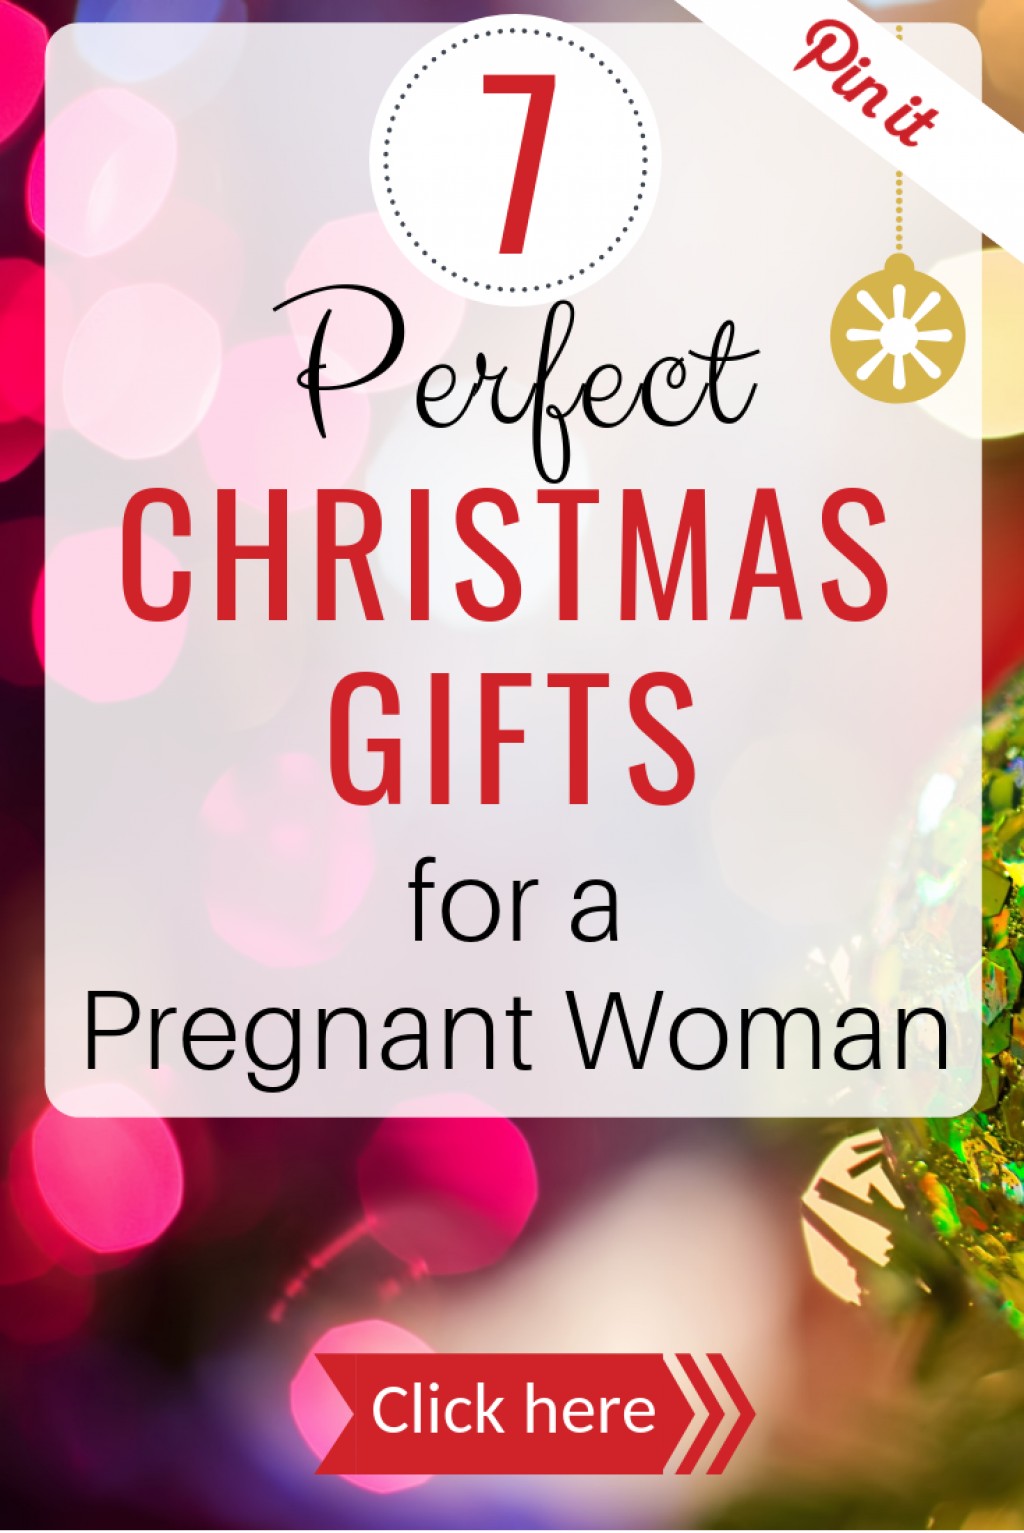 7 perfect christmas gifts for your pregnant wife, girlfriend, or